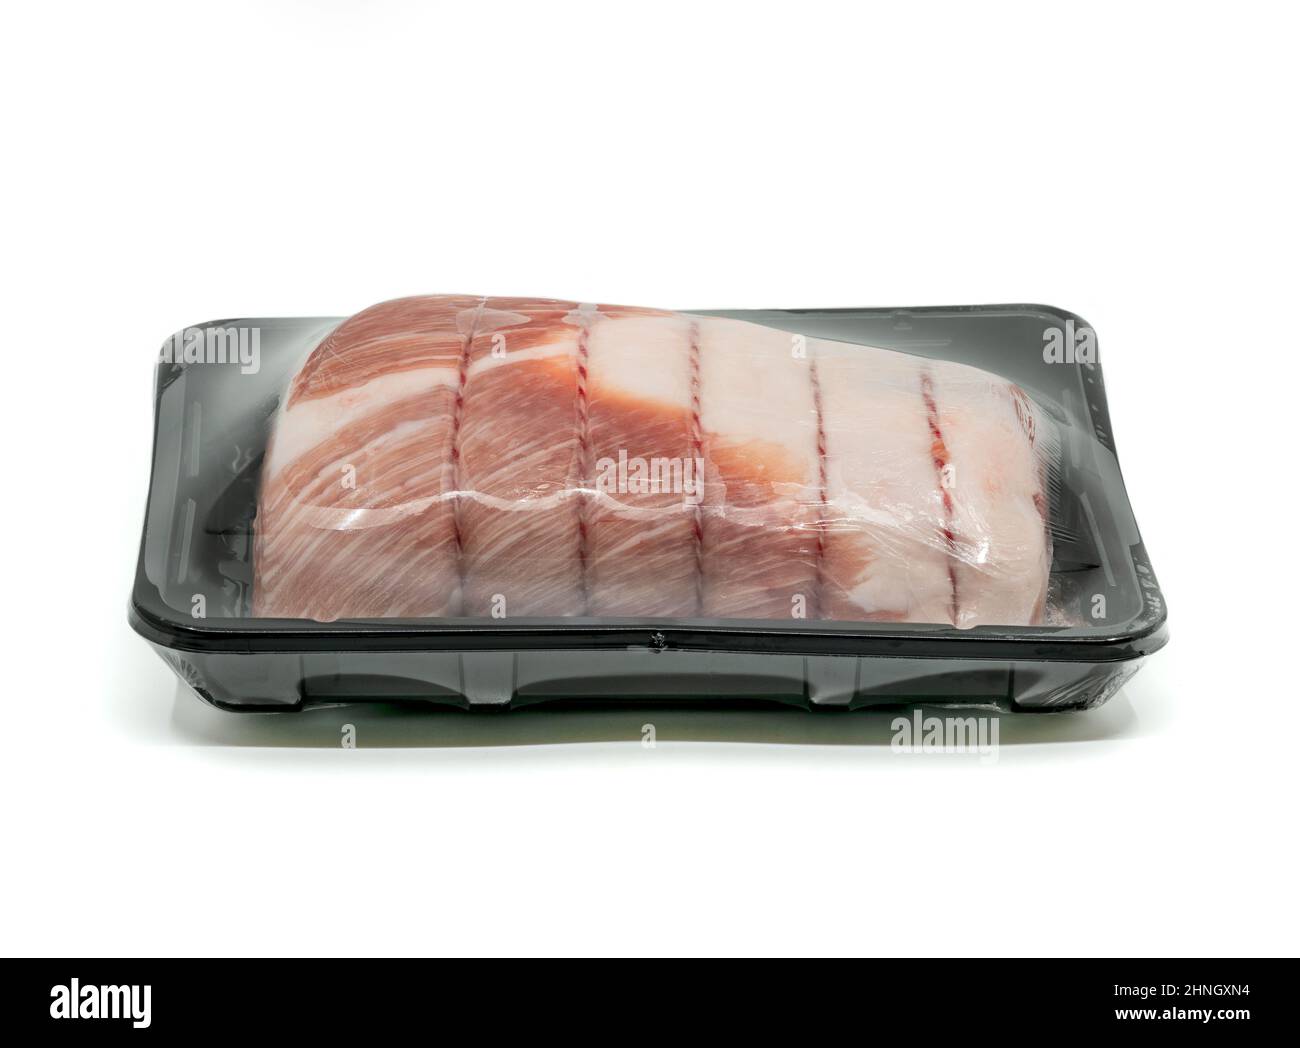 Close up raw cut of pork loin, tied up and rolled with butcher's string in black plastic container, wrapped with plastic film preservation for sale on Stock Photo